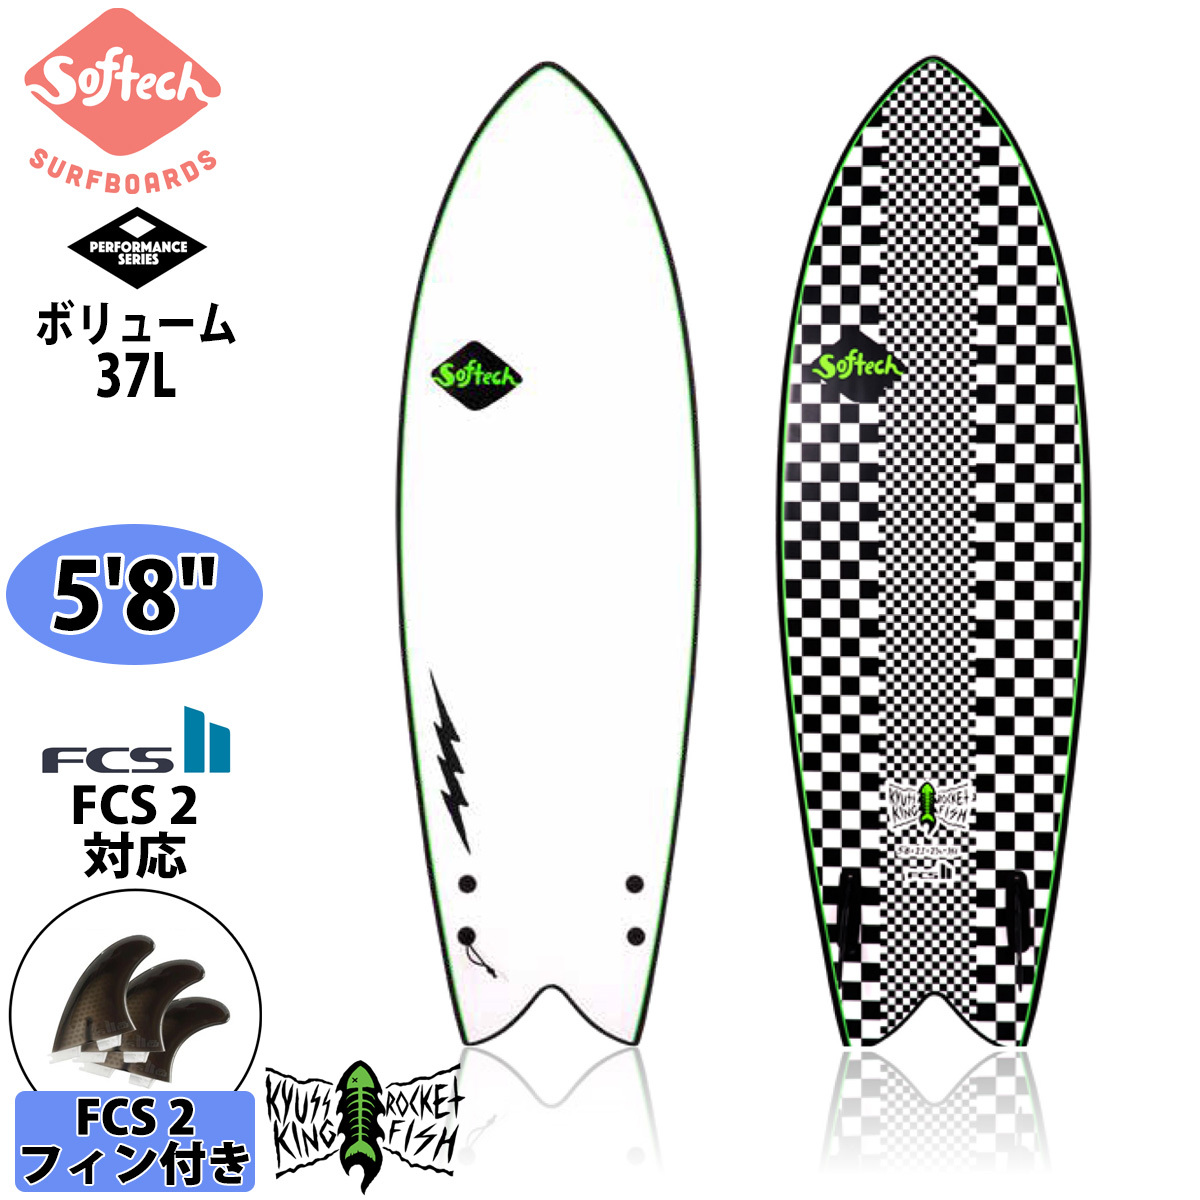 Softech SOFTBOARDS ソフテック KYUSS KING ROCKET FISH 5'8